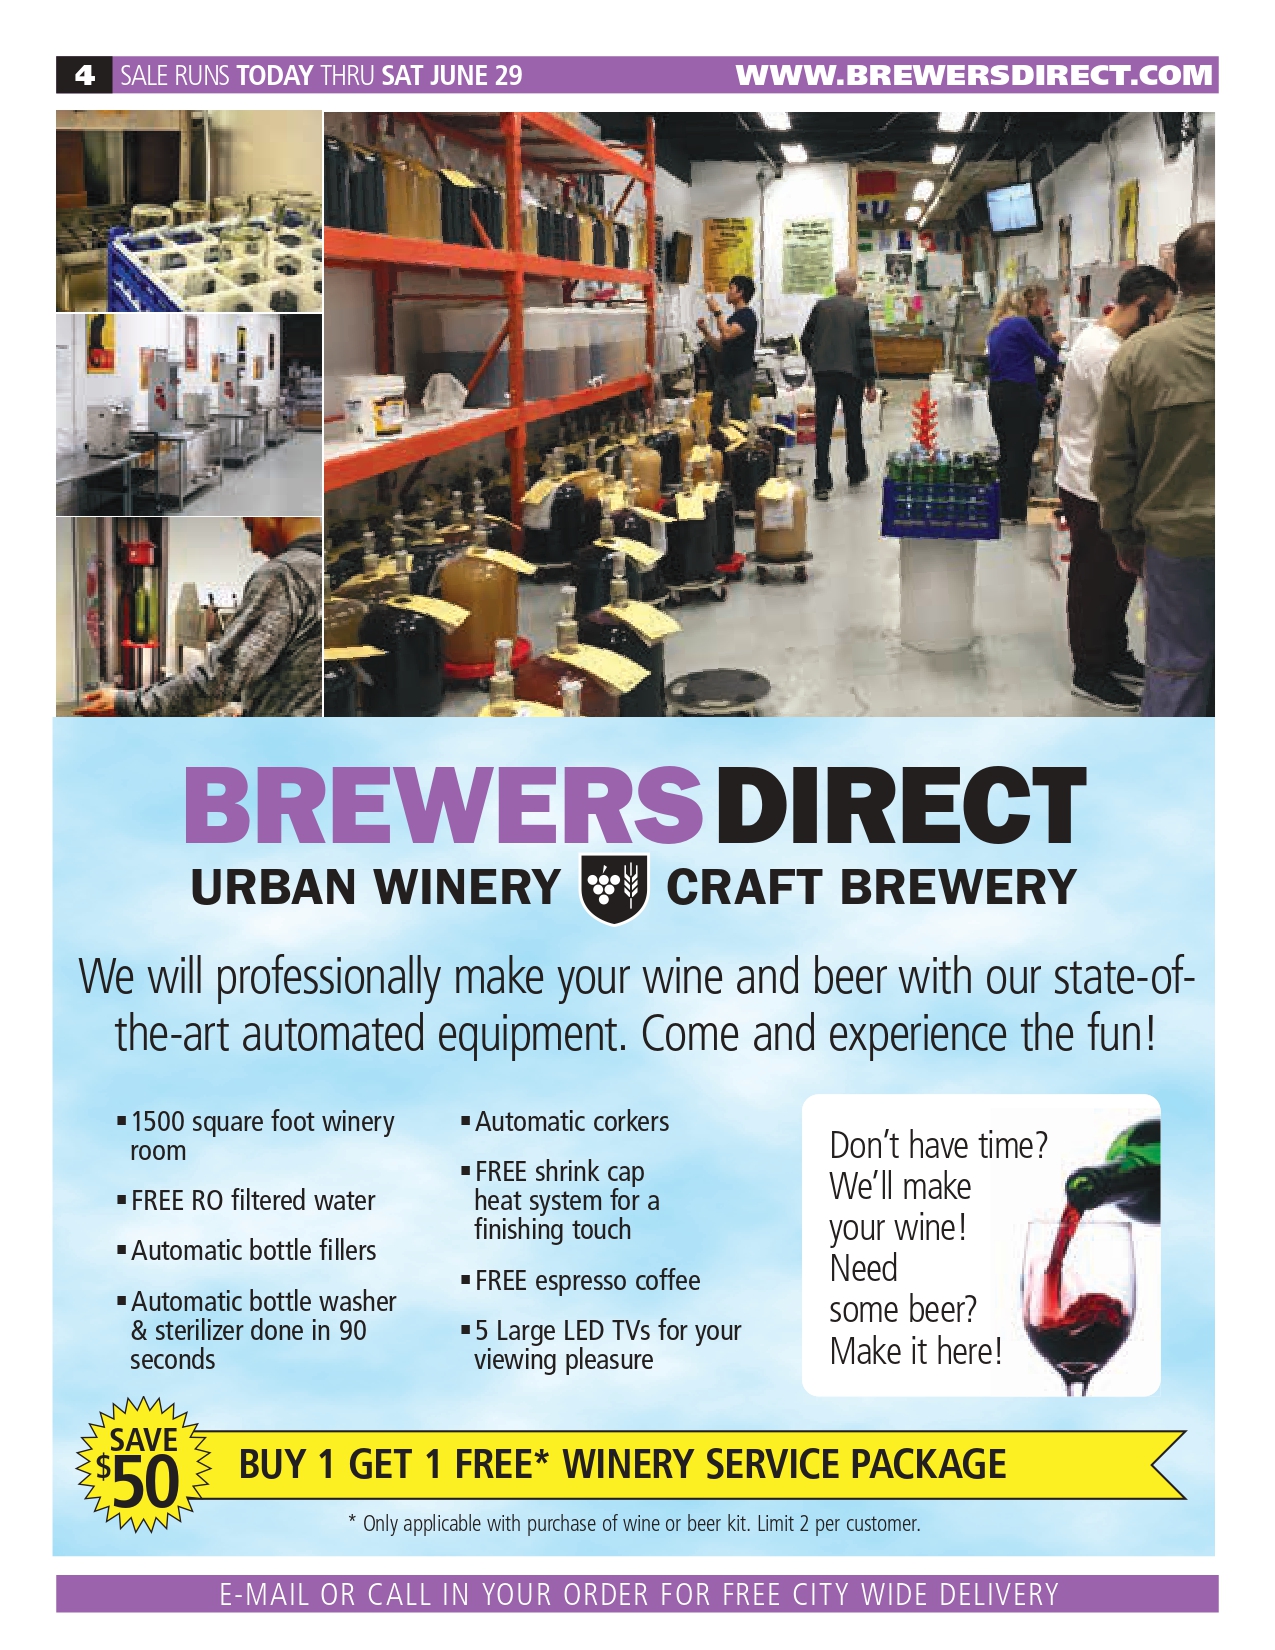 May 2024 Newsletter Brewers Direct